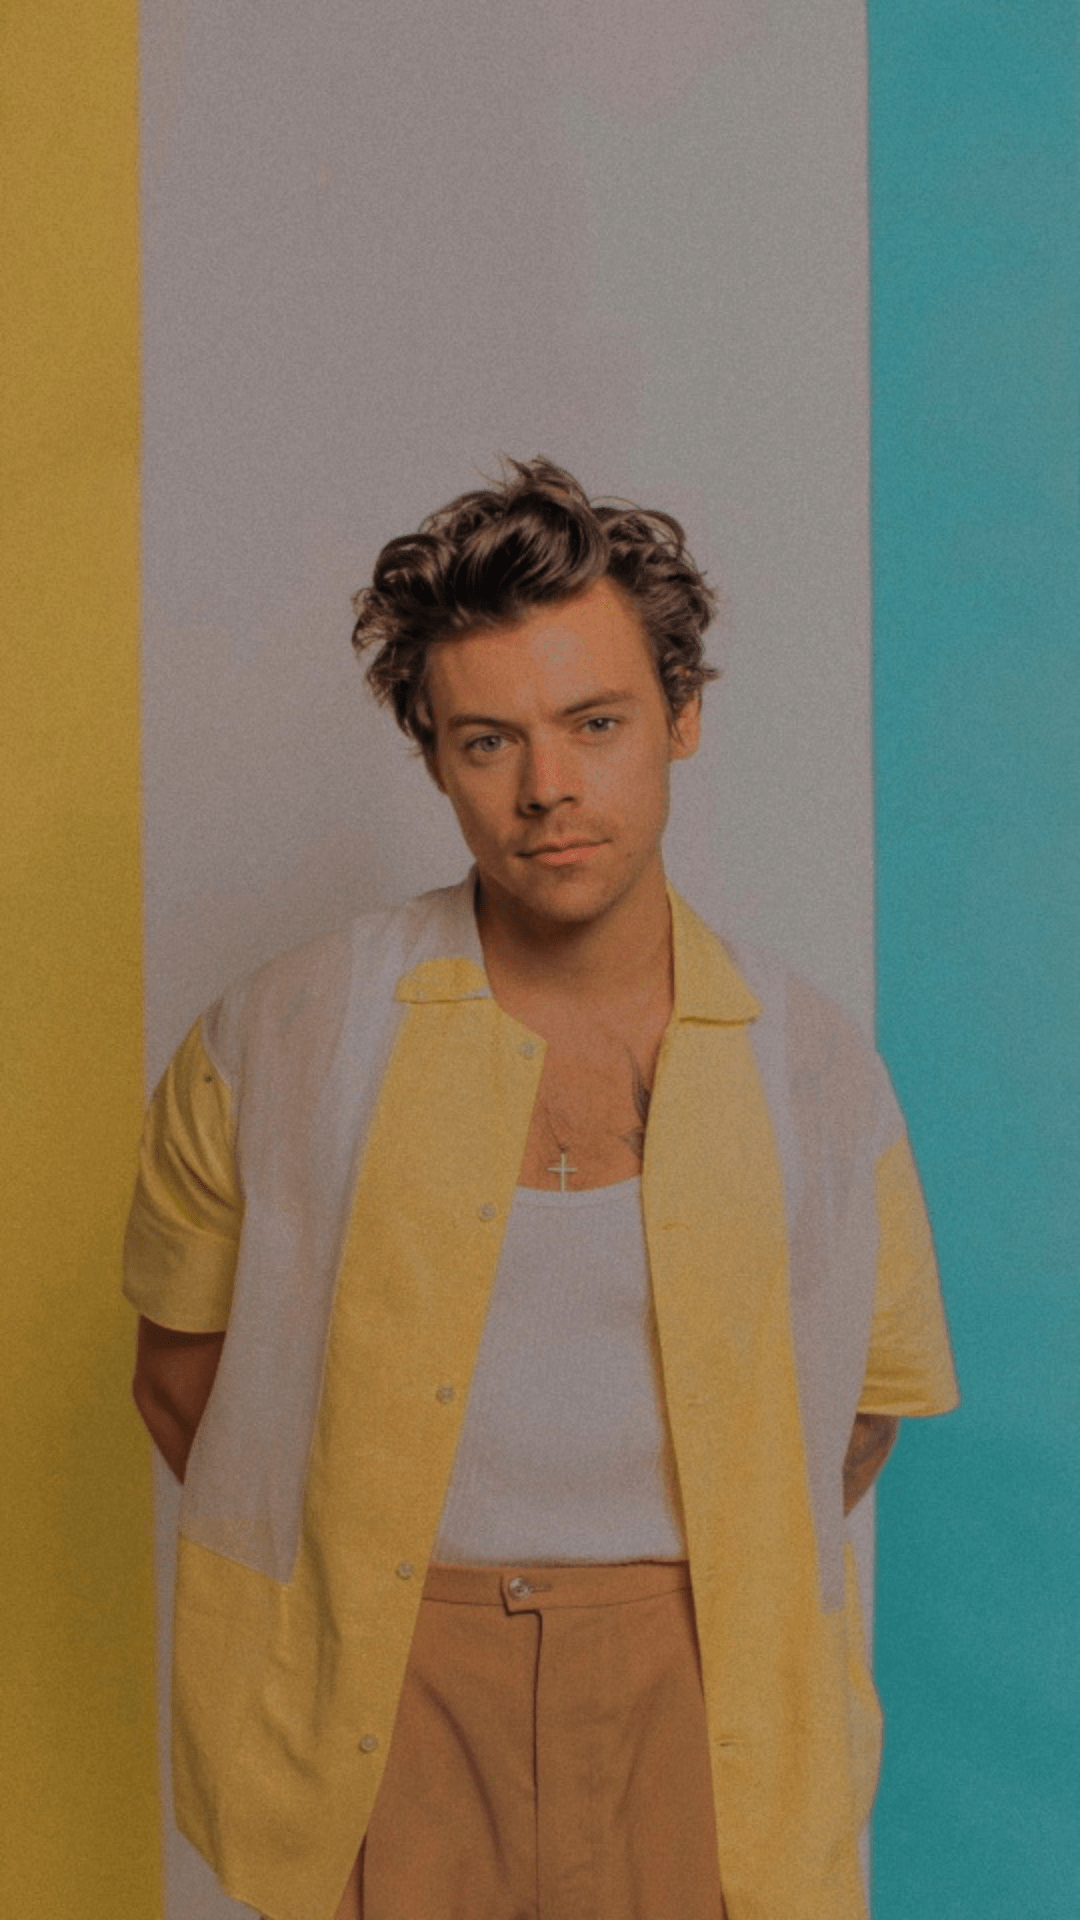 A man standing in front of an orange and yellow wall - Harry Styles